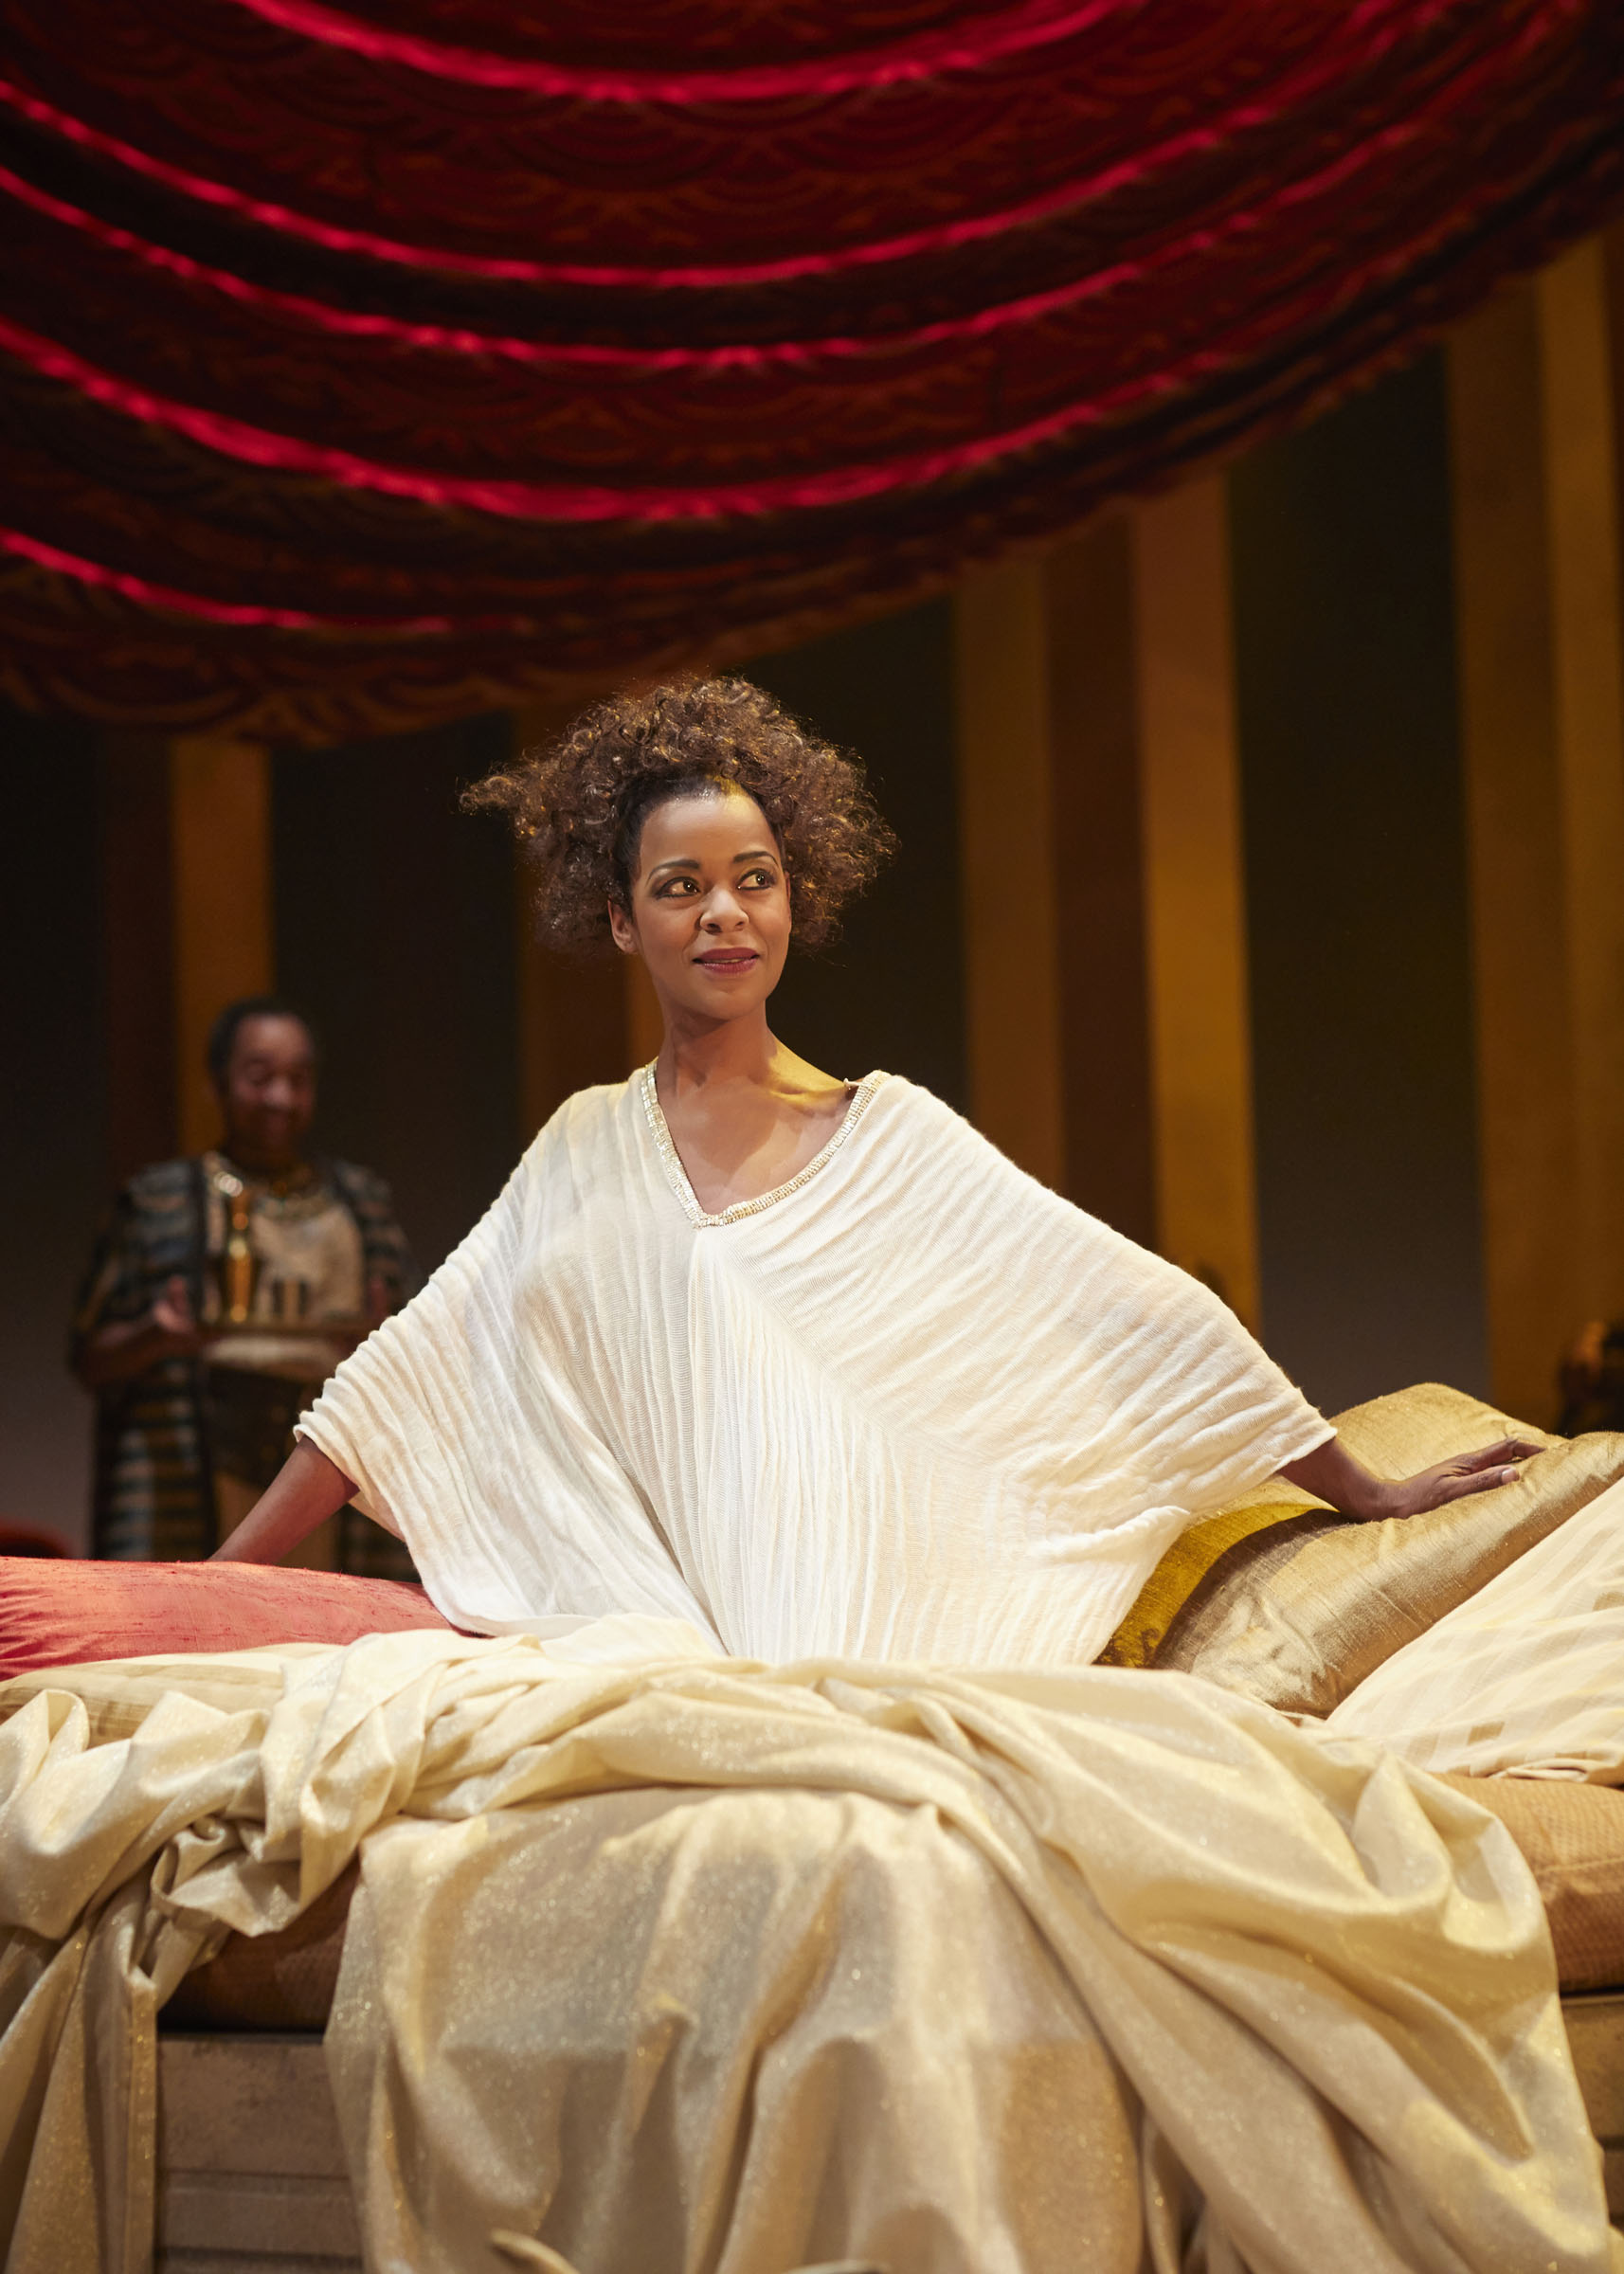 Josette Simon as Cleopatra in Anthony and Cleopatra at the Royal Shakespeare Company